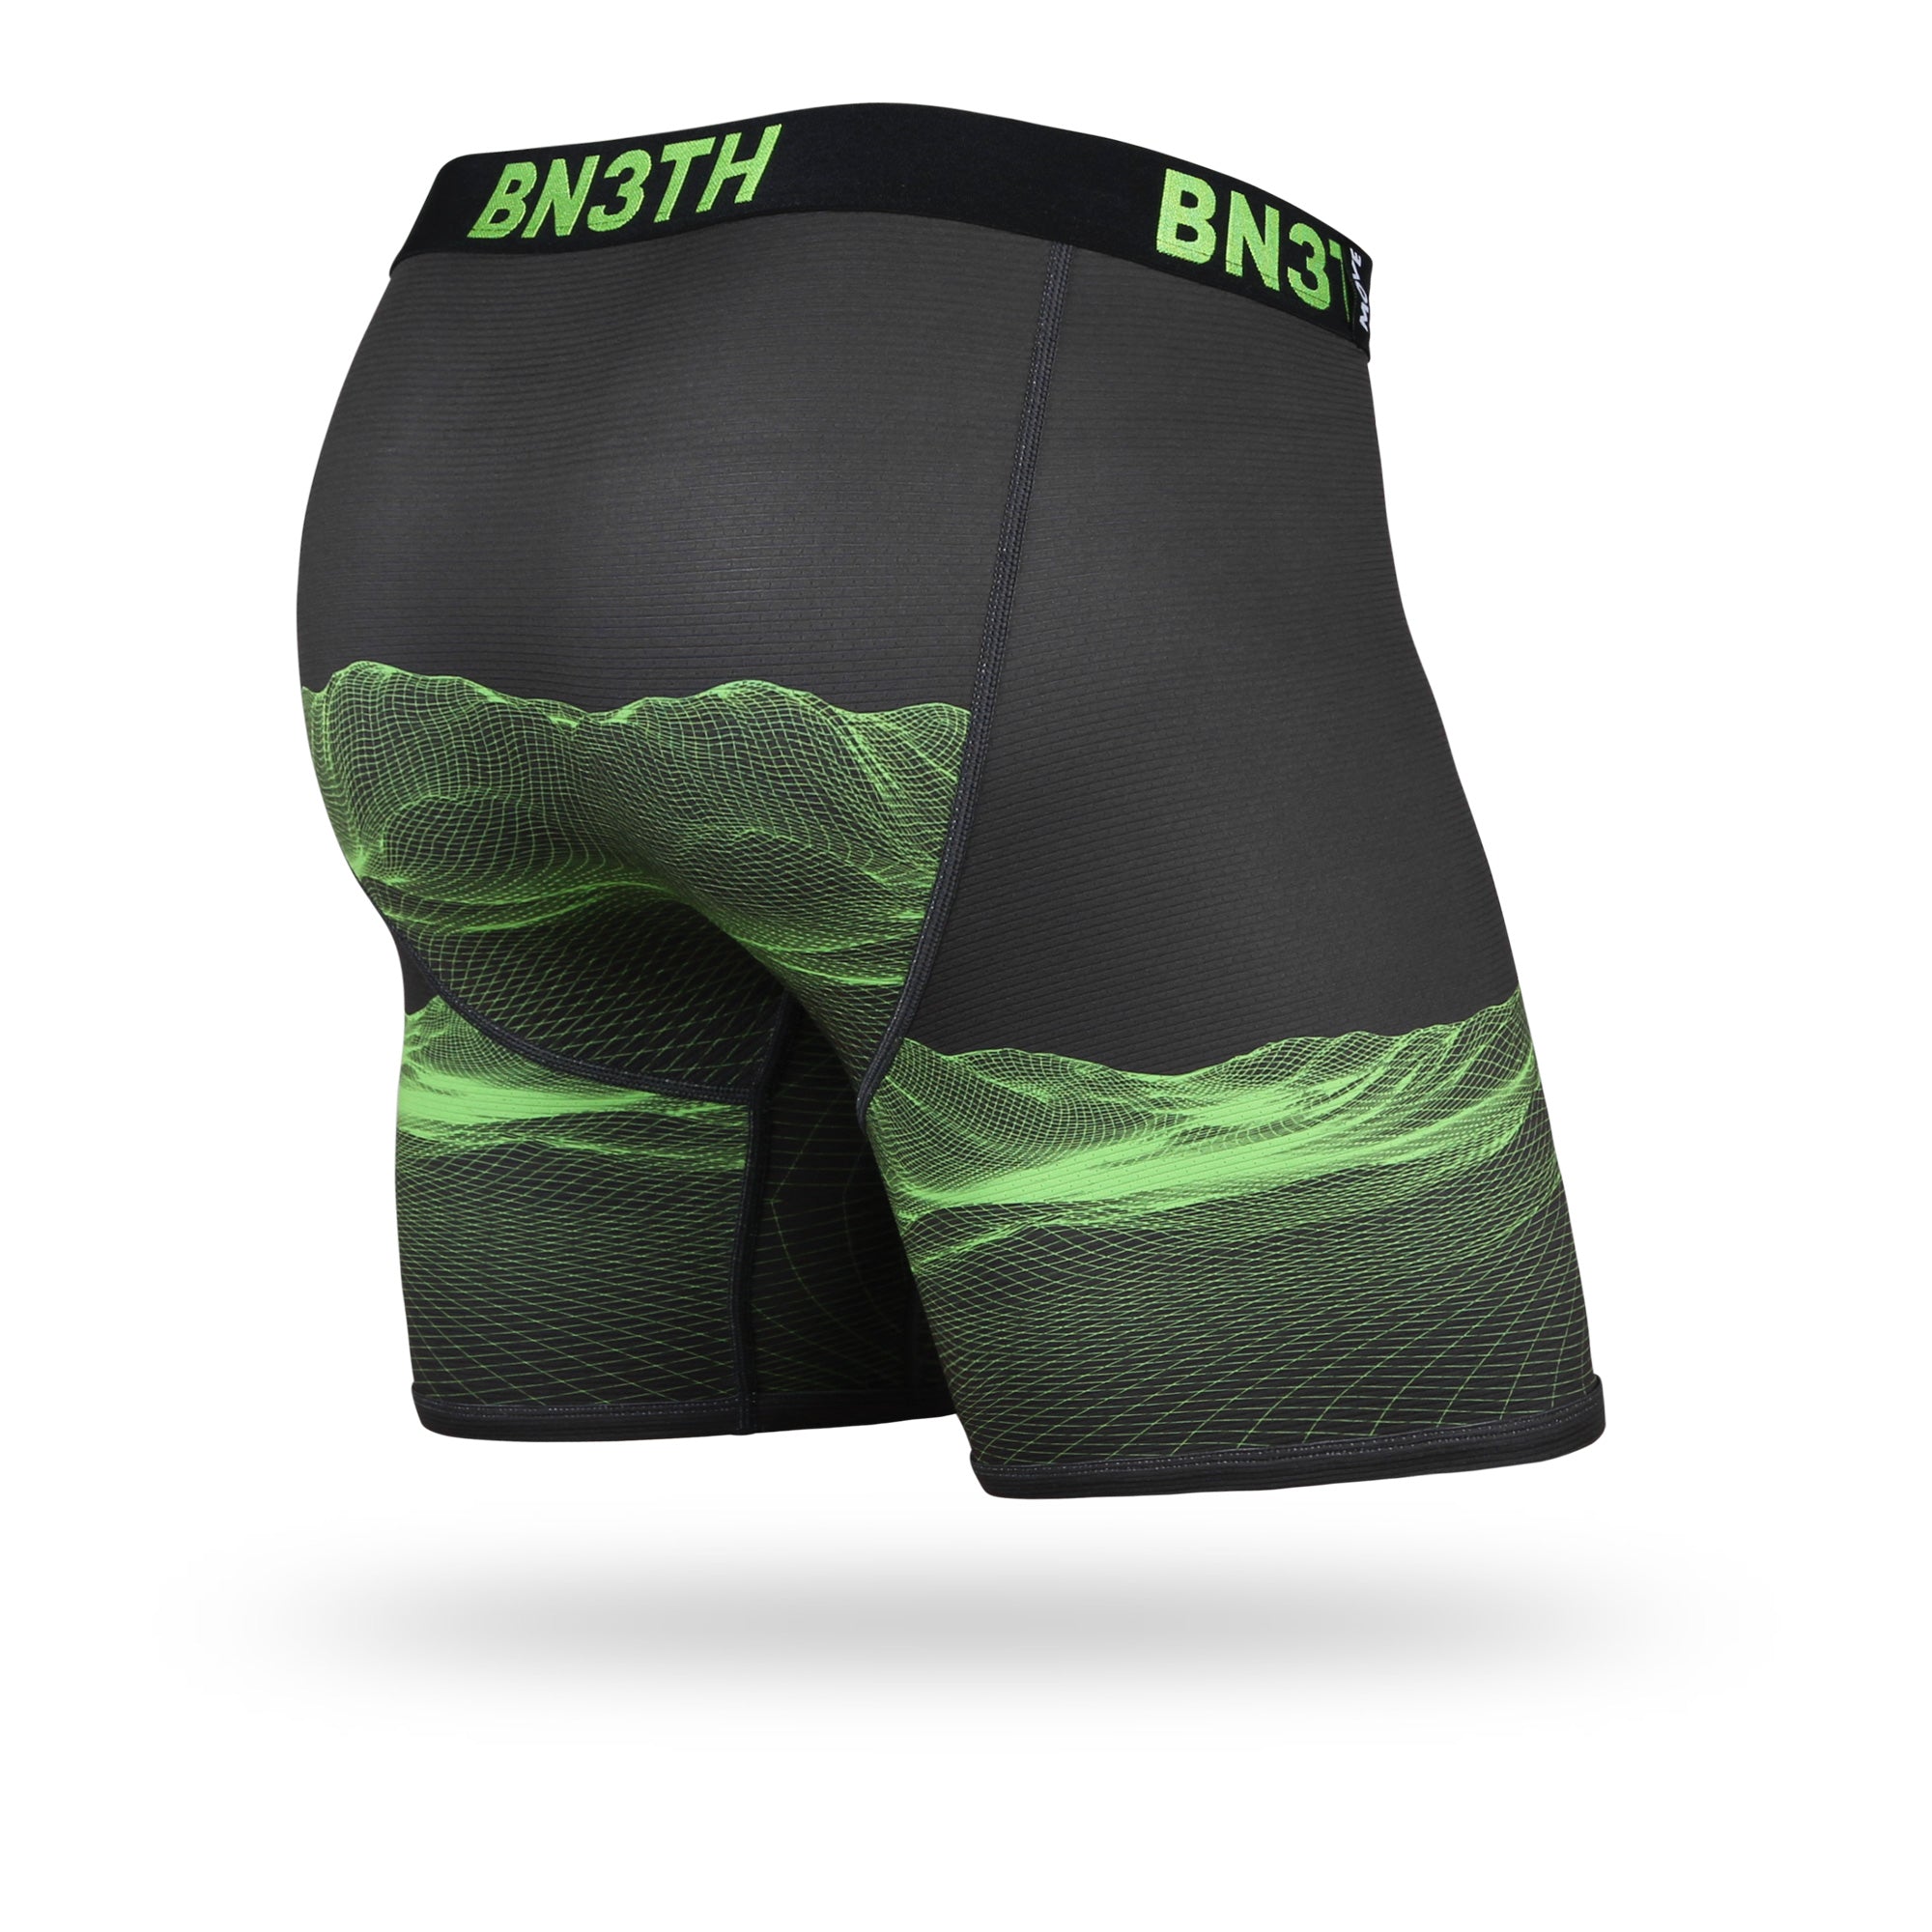 Bn3th - Pro Ionic+ Boxer Brief : Meridian Green